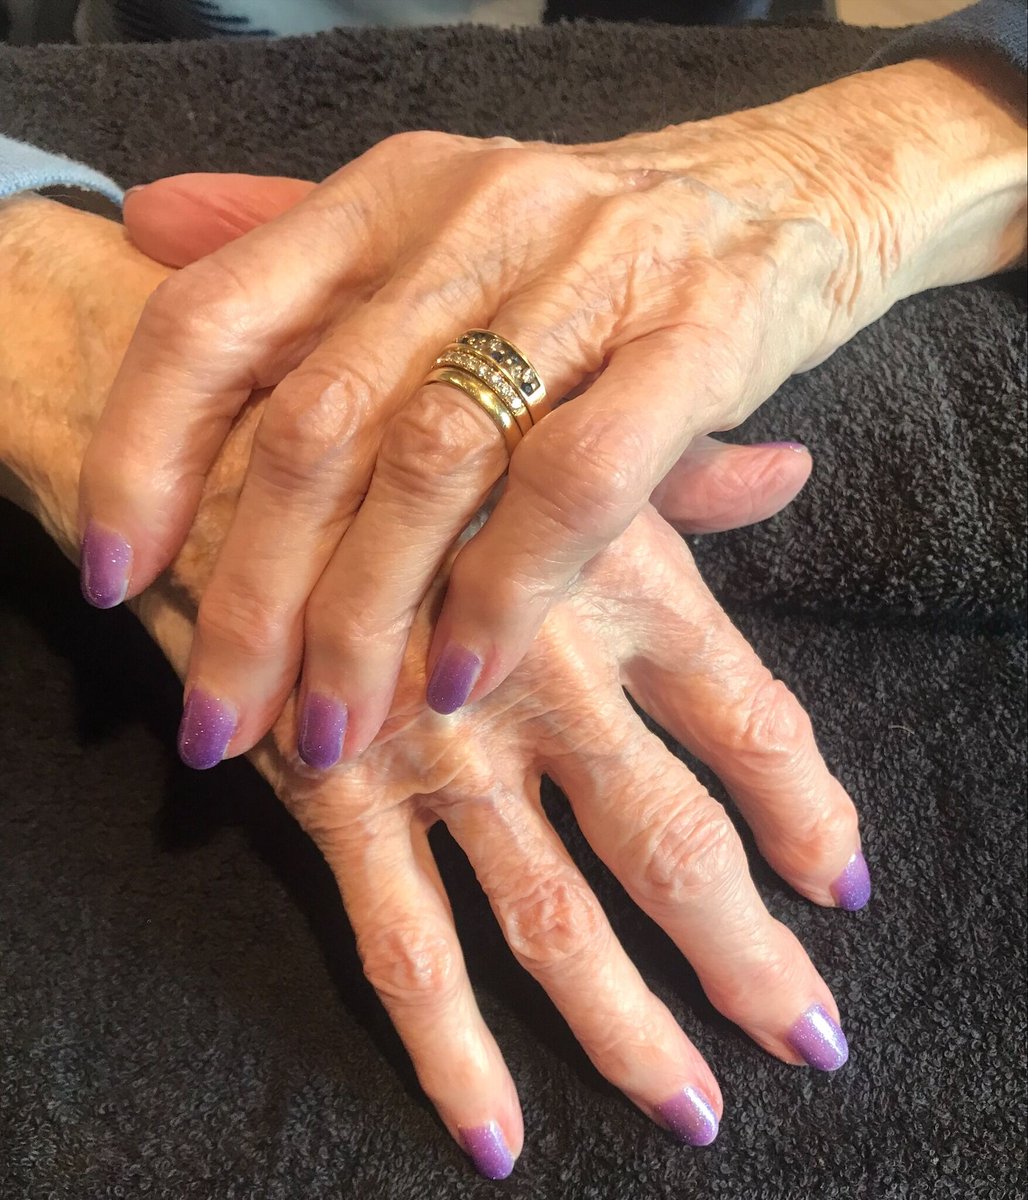 Looking good and feeling great at Lakeview Grange Care Home in Chichester. Relaxing massages, facials, manicures plus more💄💅 . Looking beautiful ladies! 😍😍 #wellbeing #lookinggoodfeelinggood #feelinggreat #beautytherapy #CareHomeActivities #proudtocare #wecare #chichester